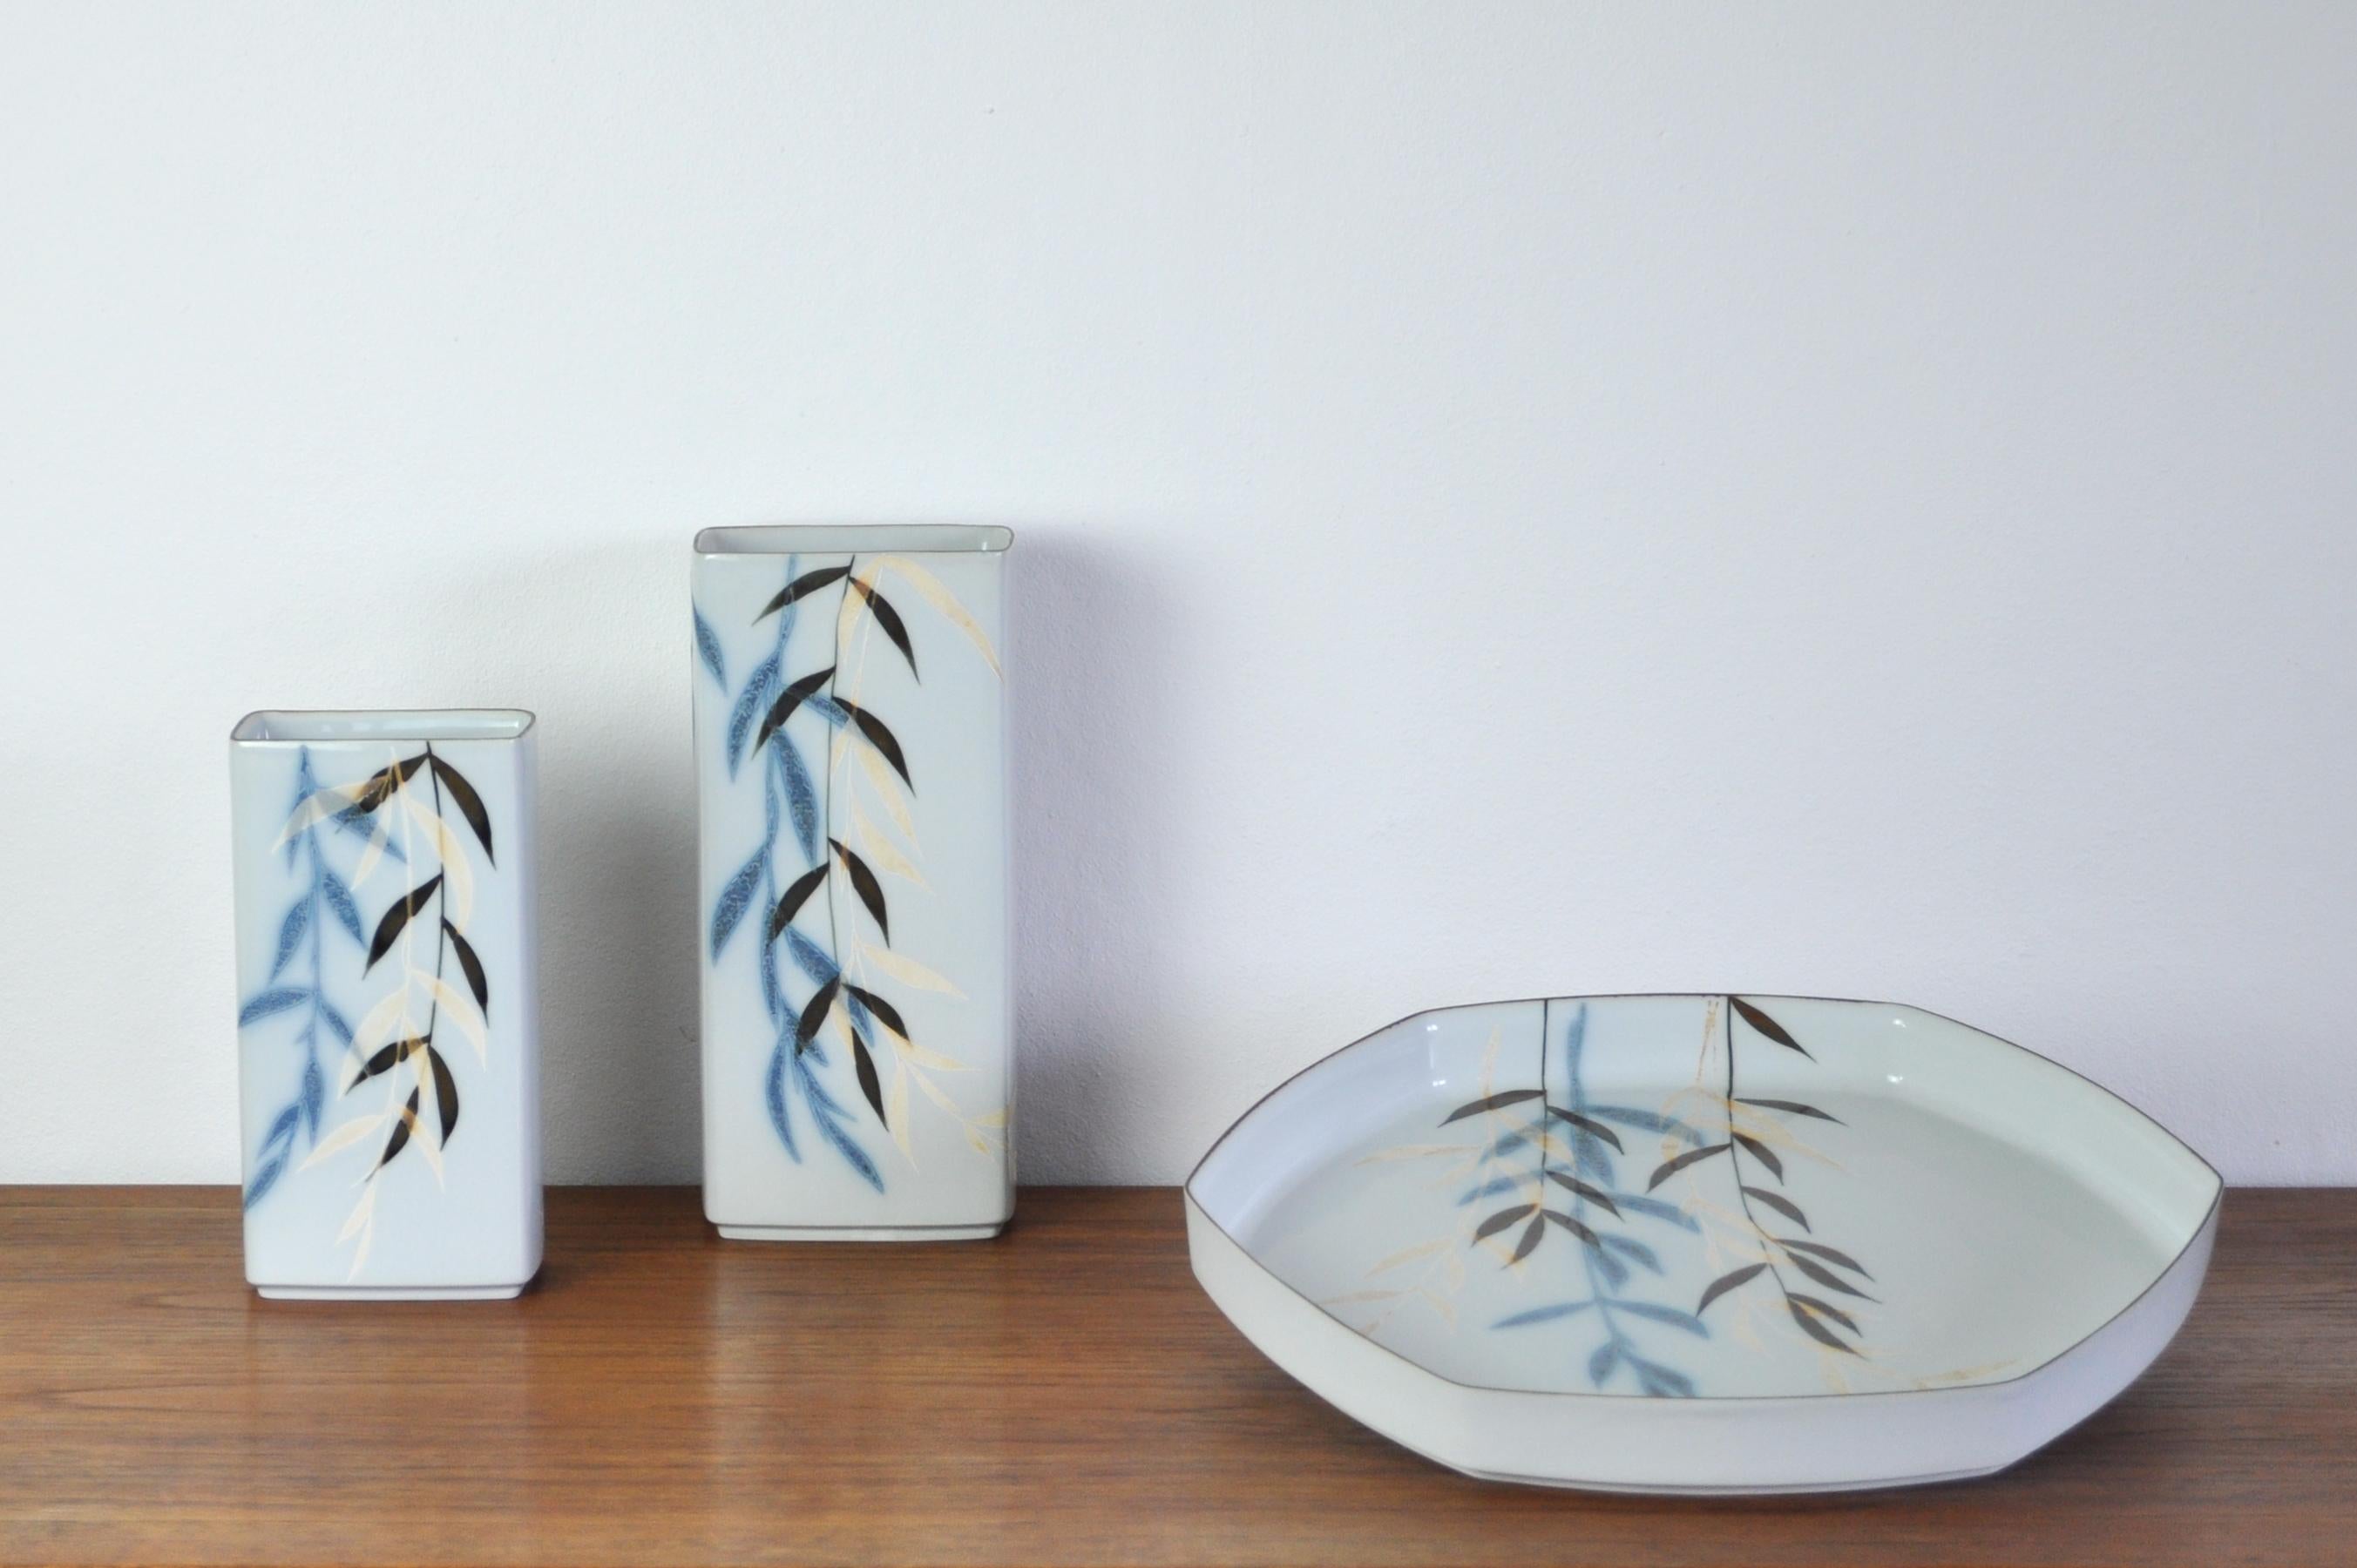 Set of 2 vases and a dish designed by ceramist Ivan Weiss for Royal Copenhagen from the series 